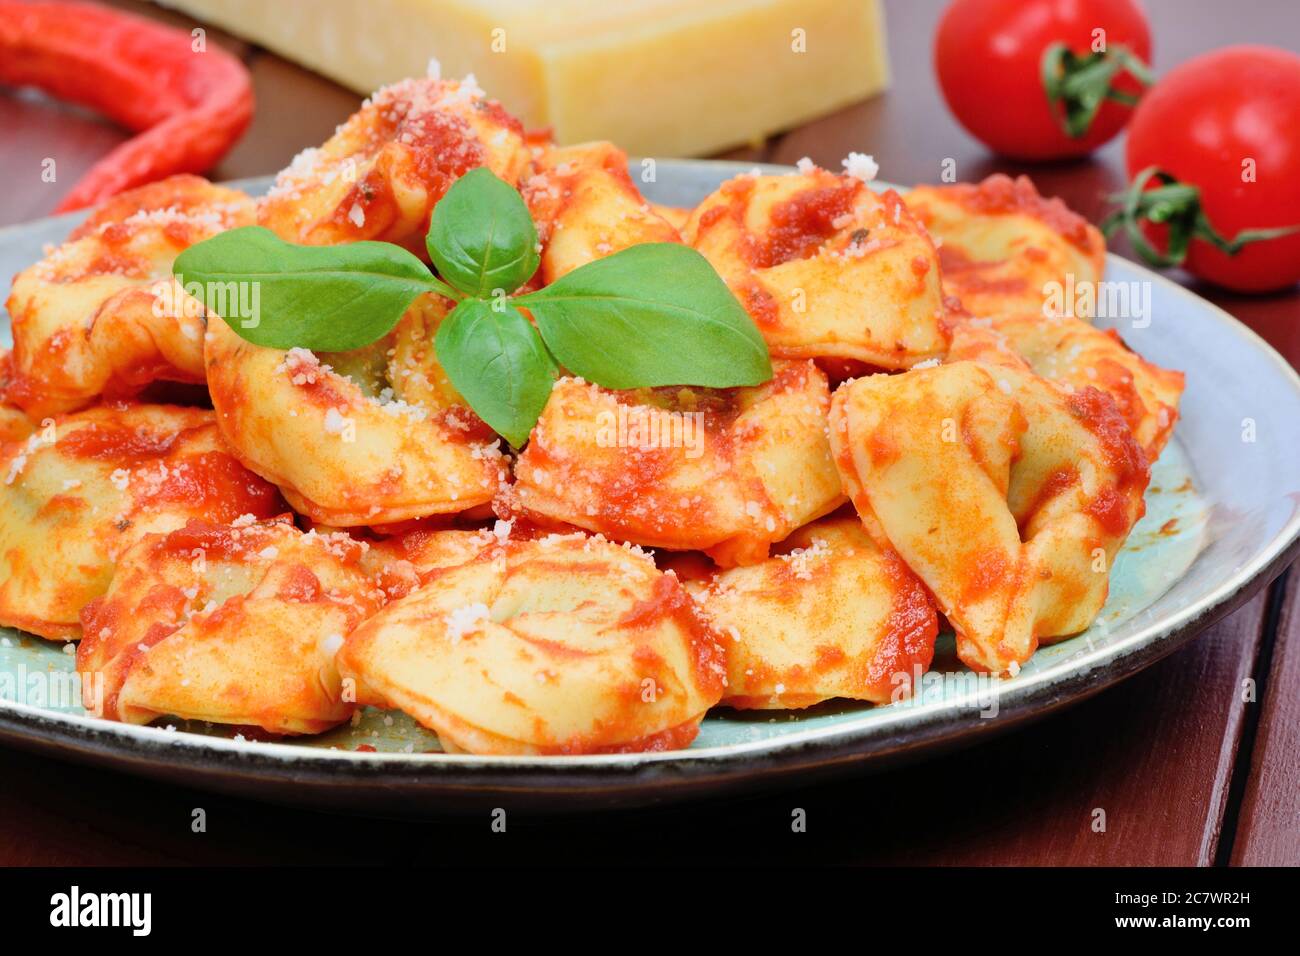 Tortellini with tomatoes sauce in a plate on wooden table Stock Photo